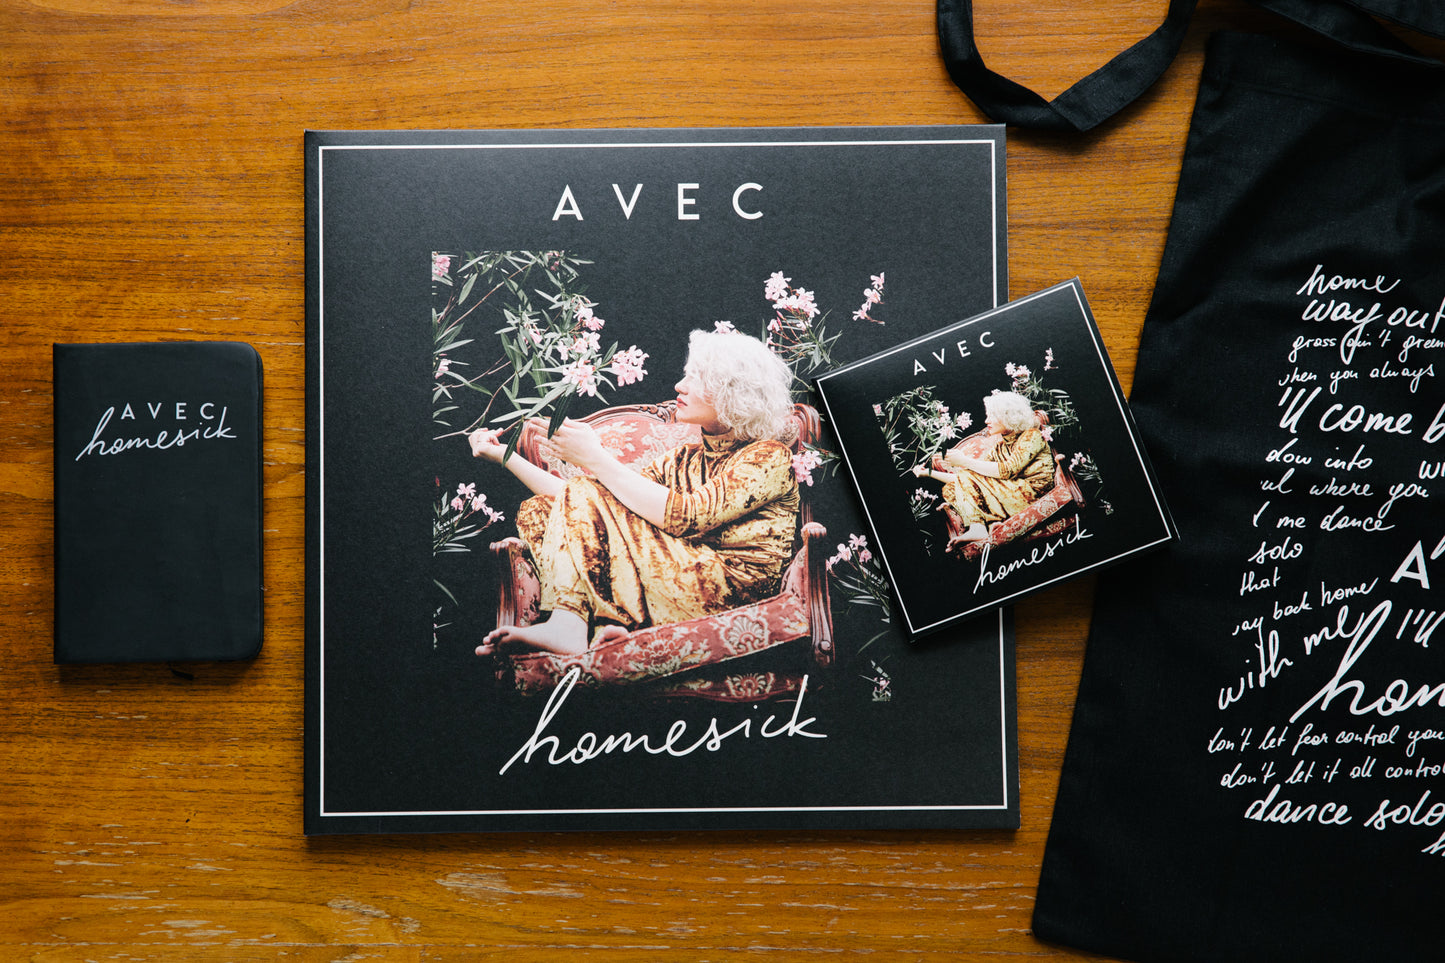 AVEC - Homesick Limited Edition Collectors Edition Box